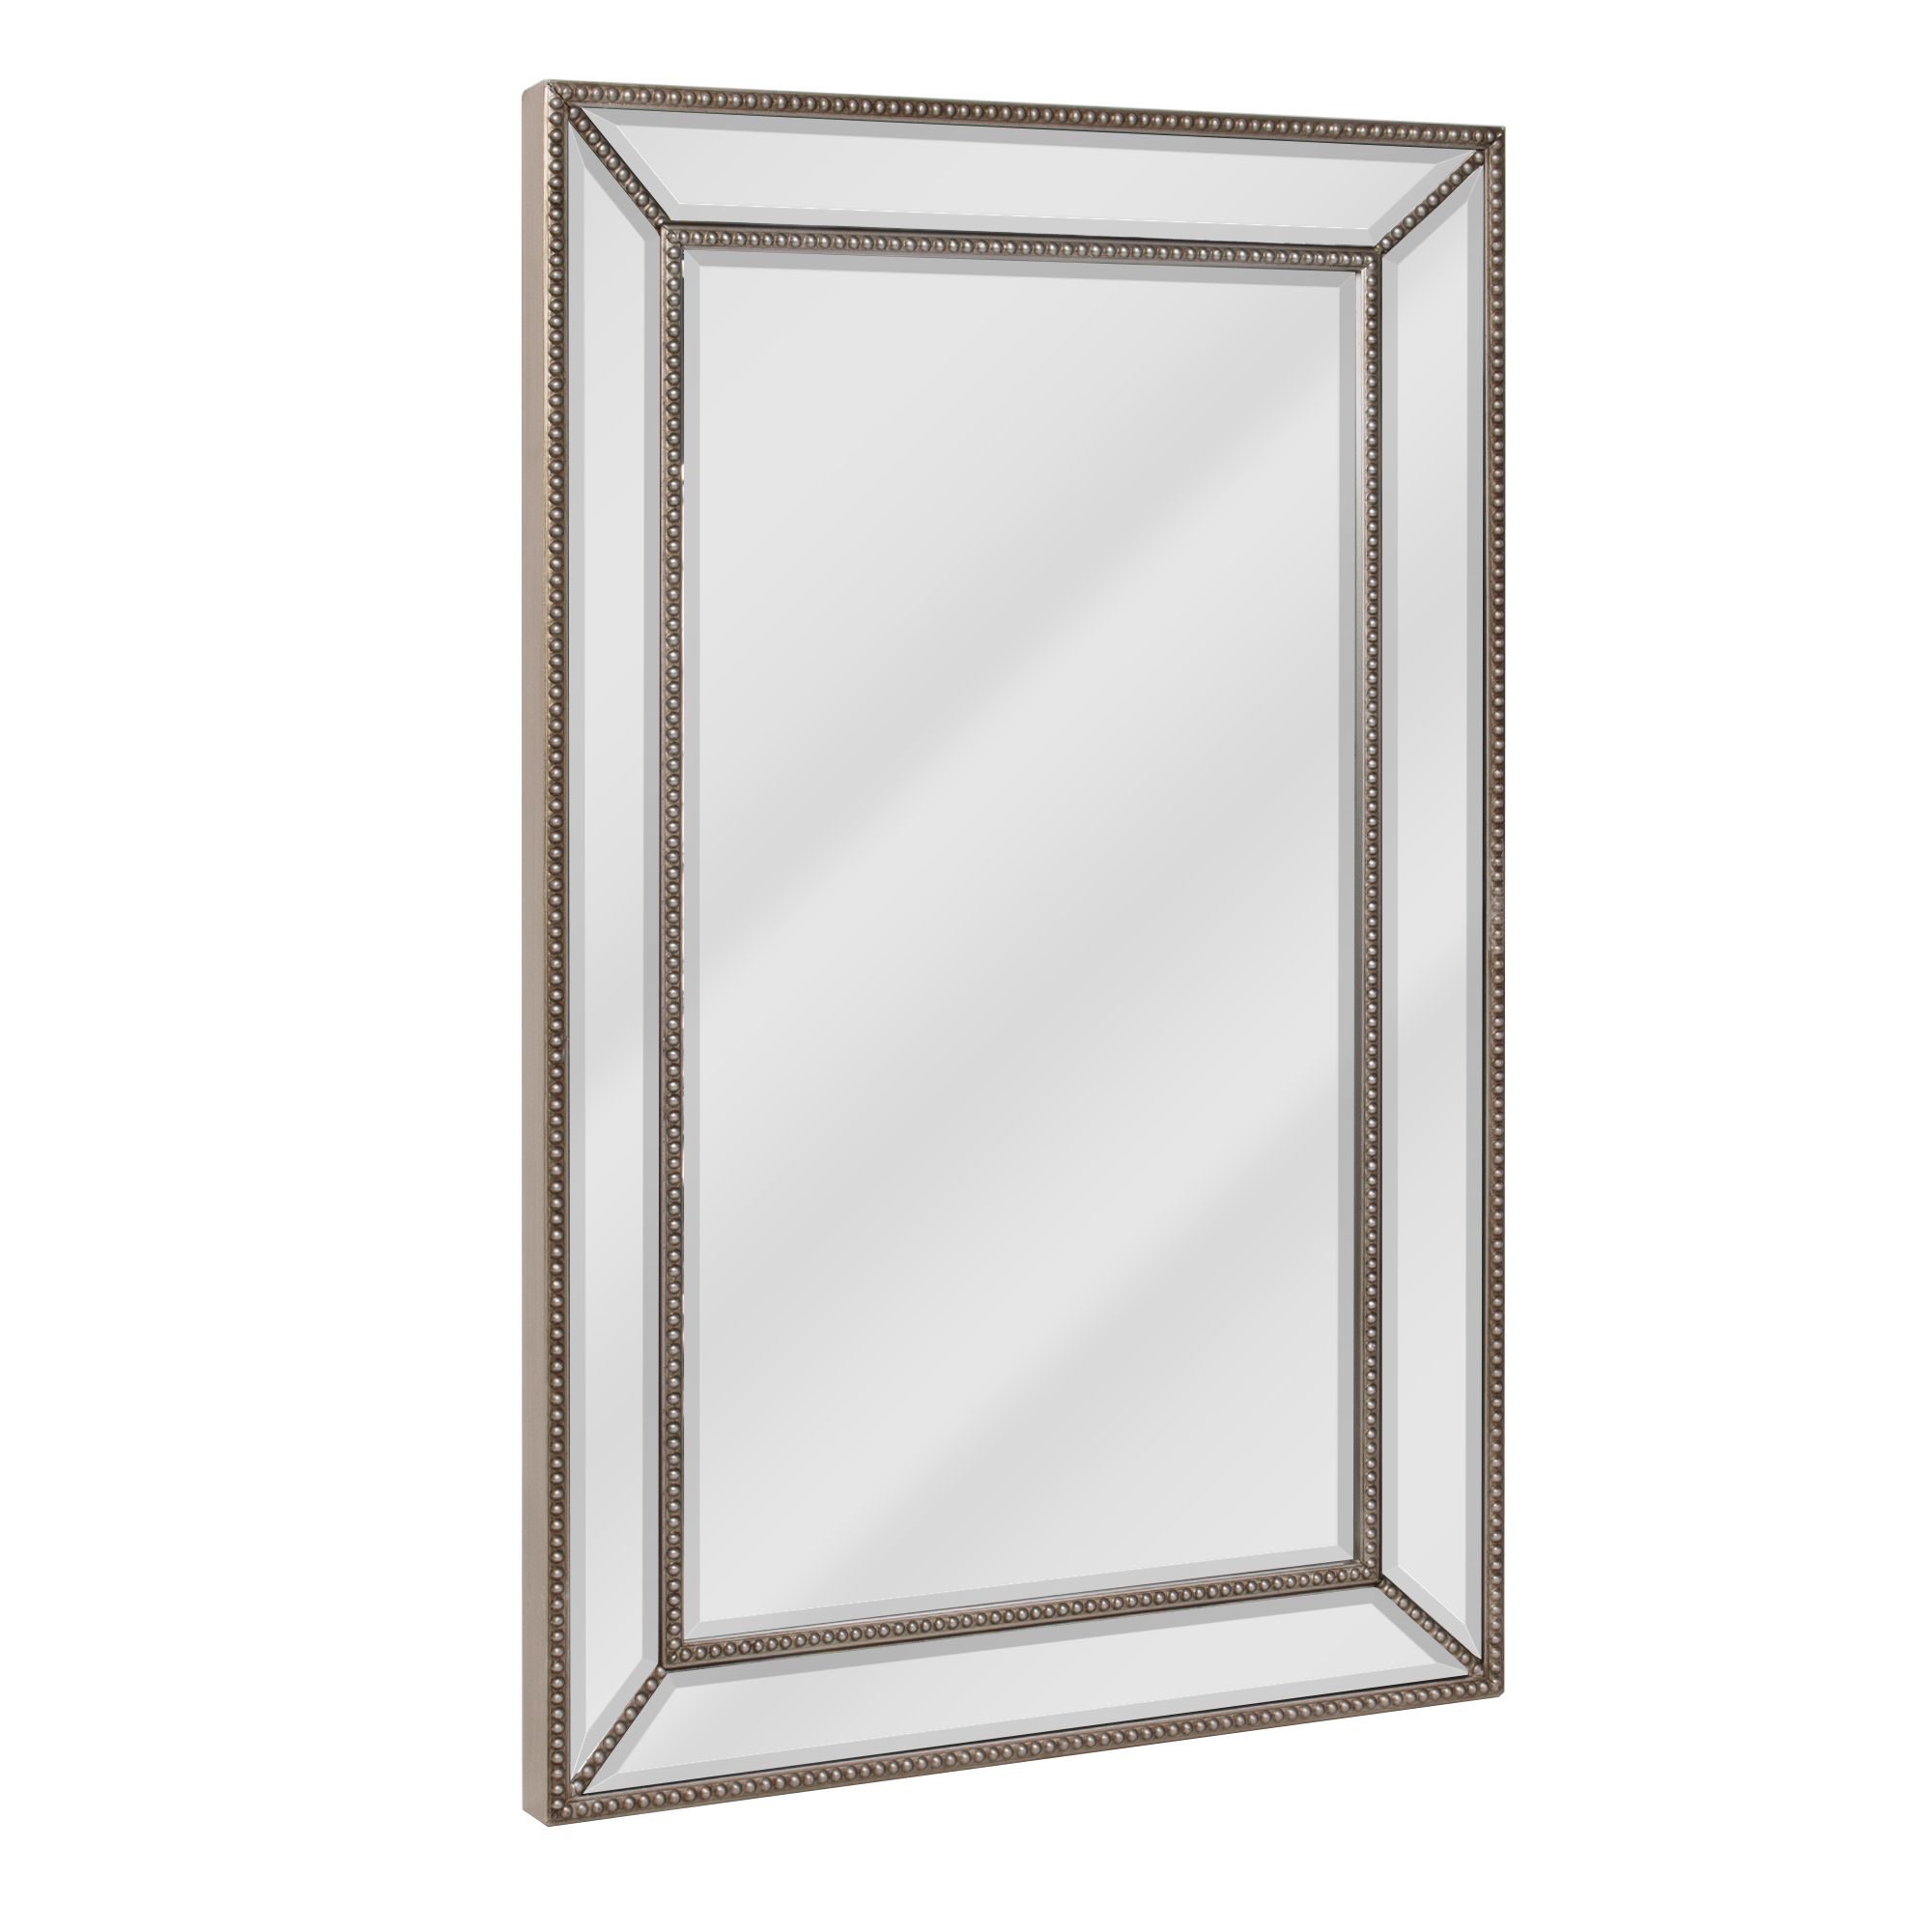 Head West Champagne Silver Beaded Glass Rectangular Framed Beveled Within Silver Beveled Wall Mirrors (View 1 of 15)